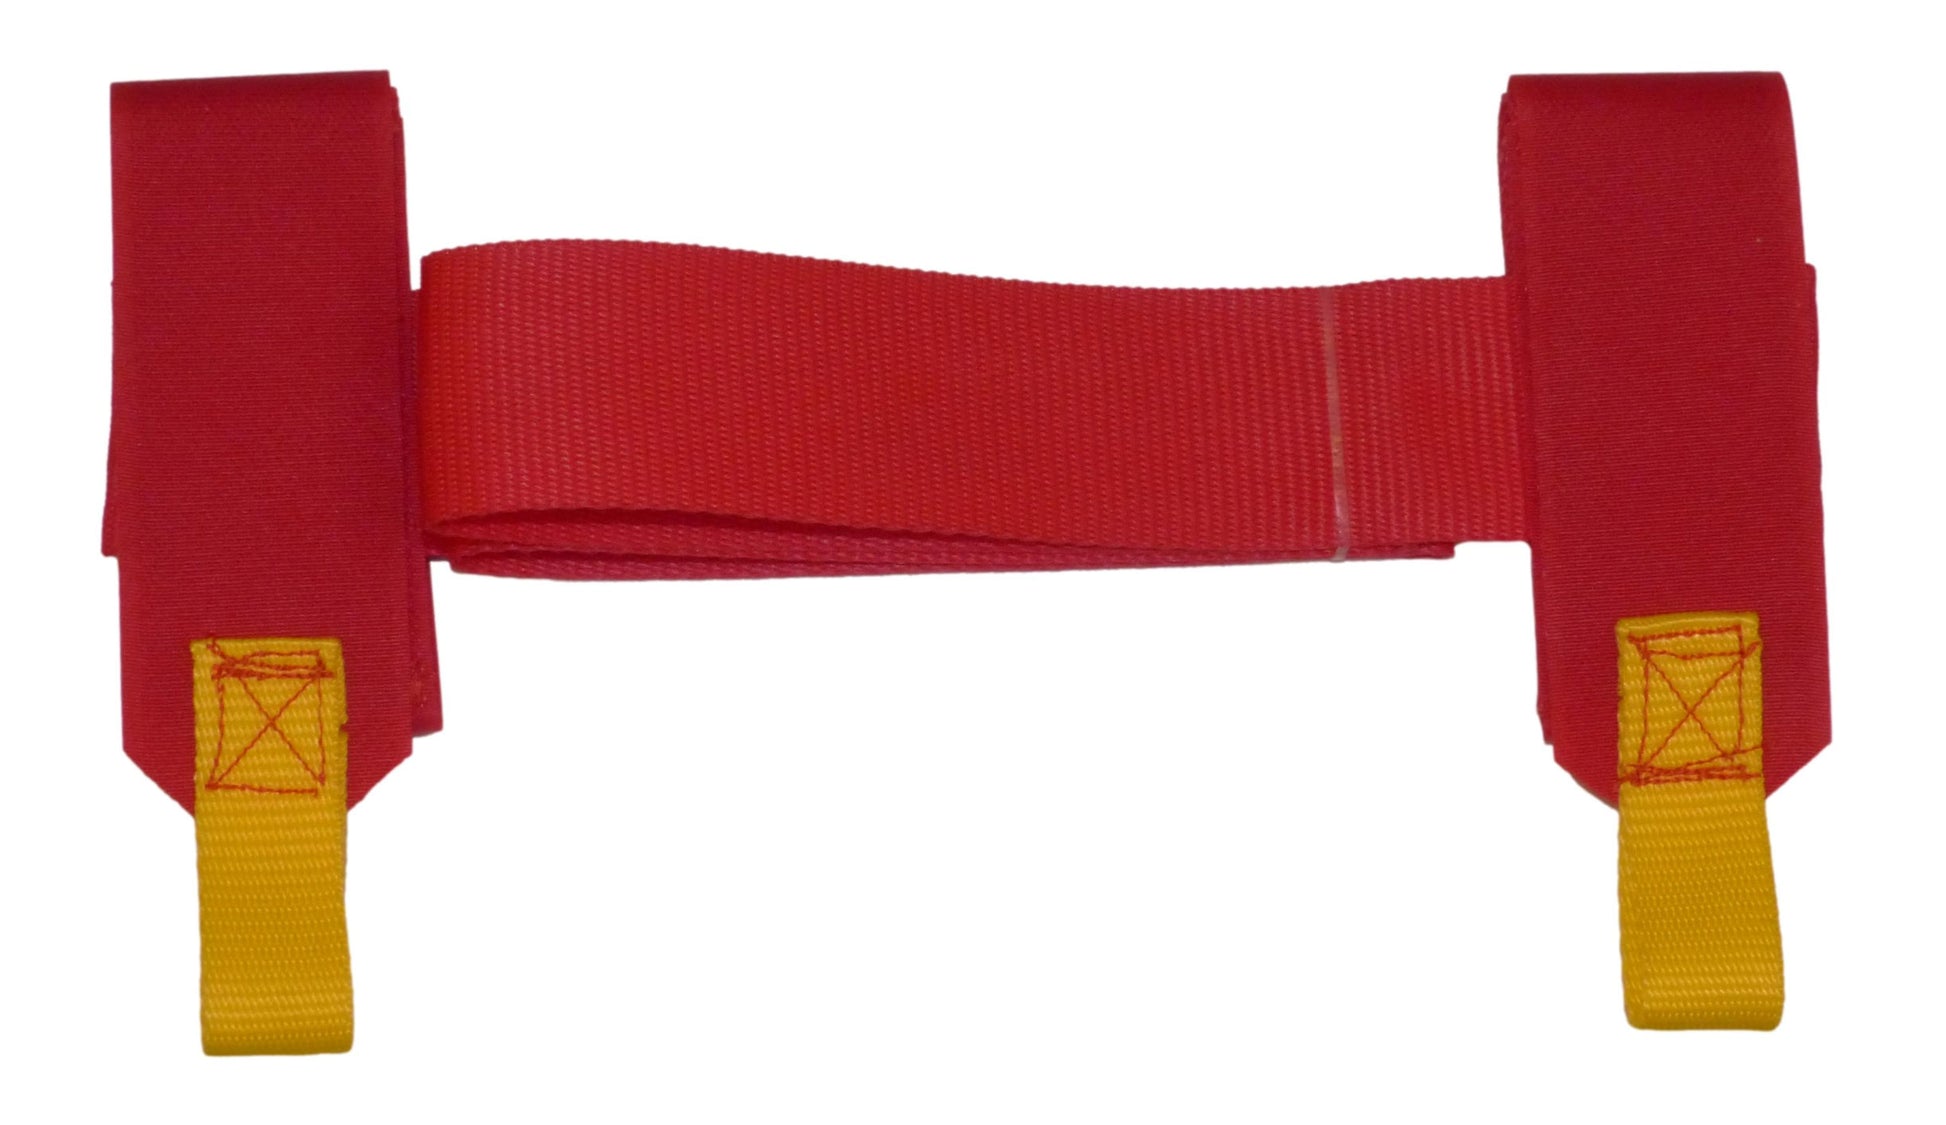 Benristraps Ski and Pole Carry Strap in red